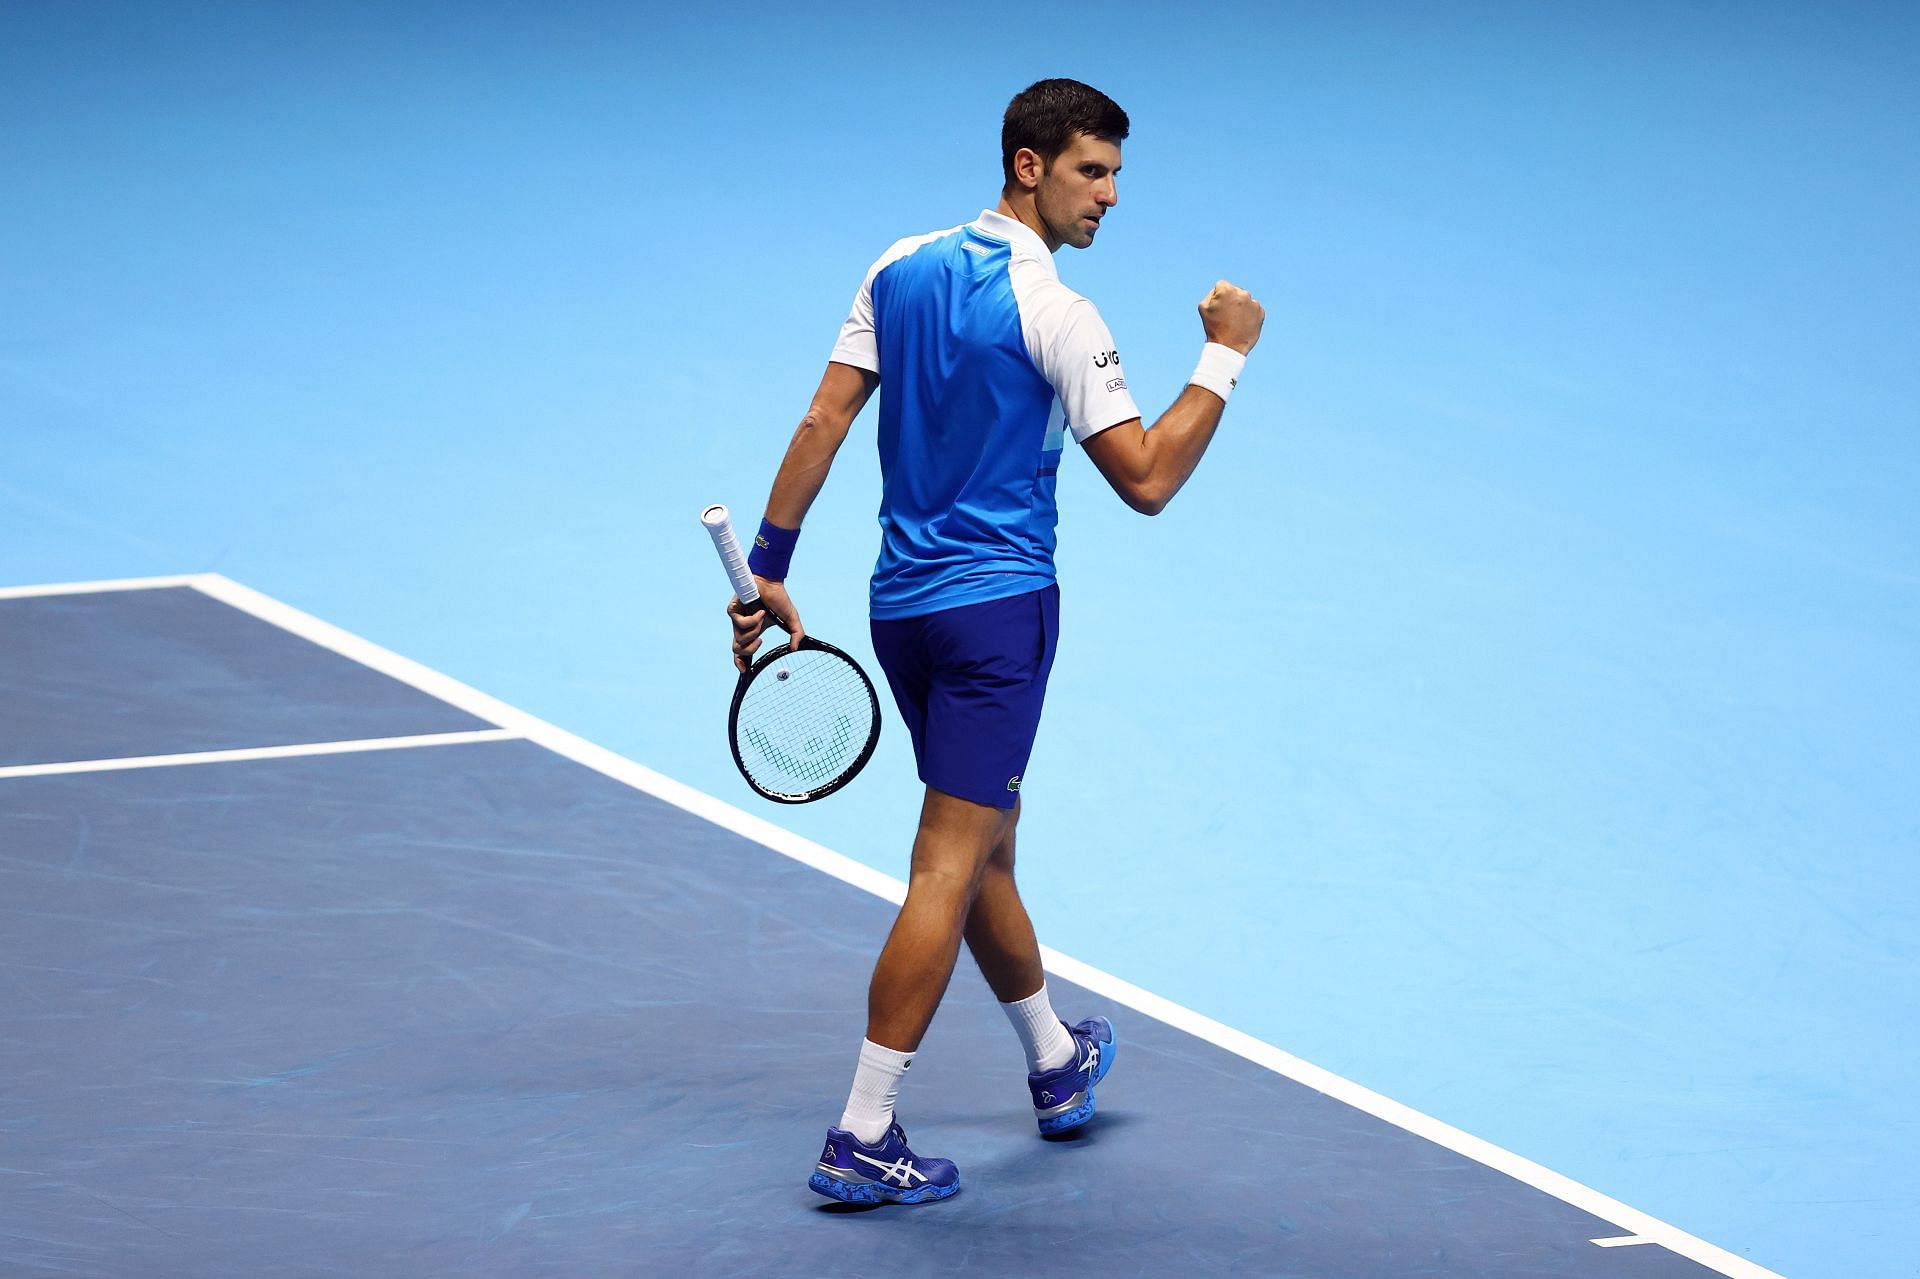 Novak Djokovic during his win against Andrey Rublev at the 2021 Nitto ATP World Tour Finals